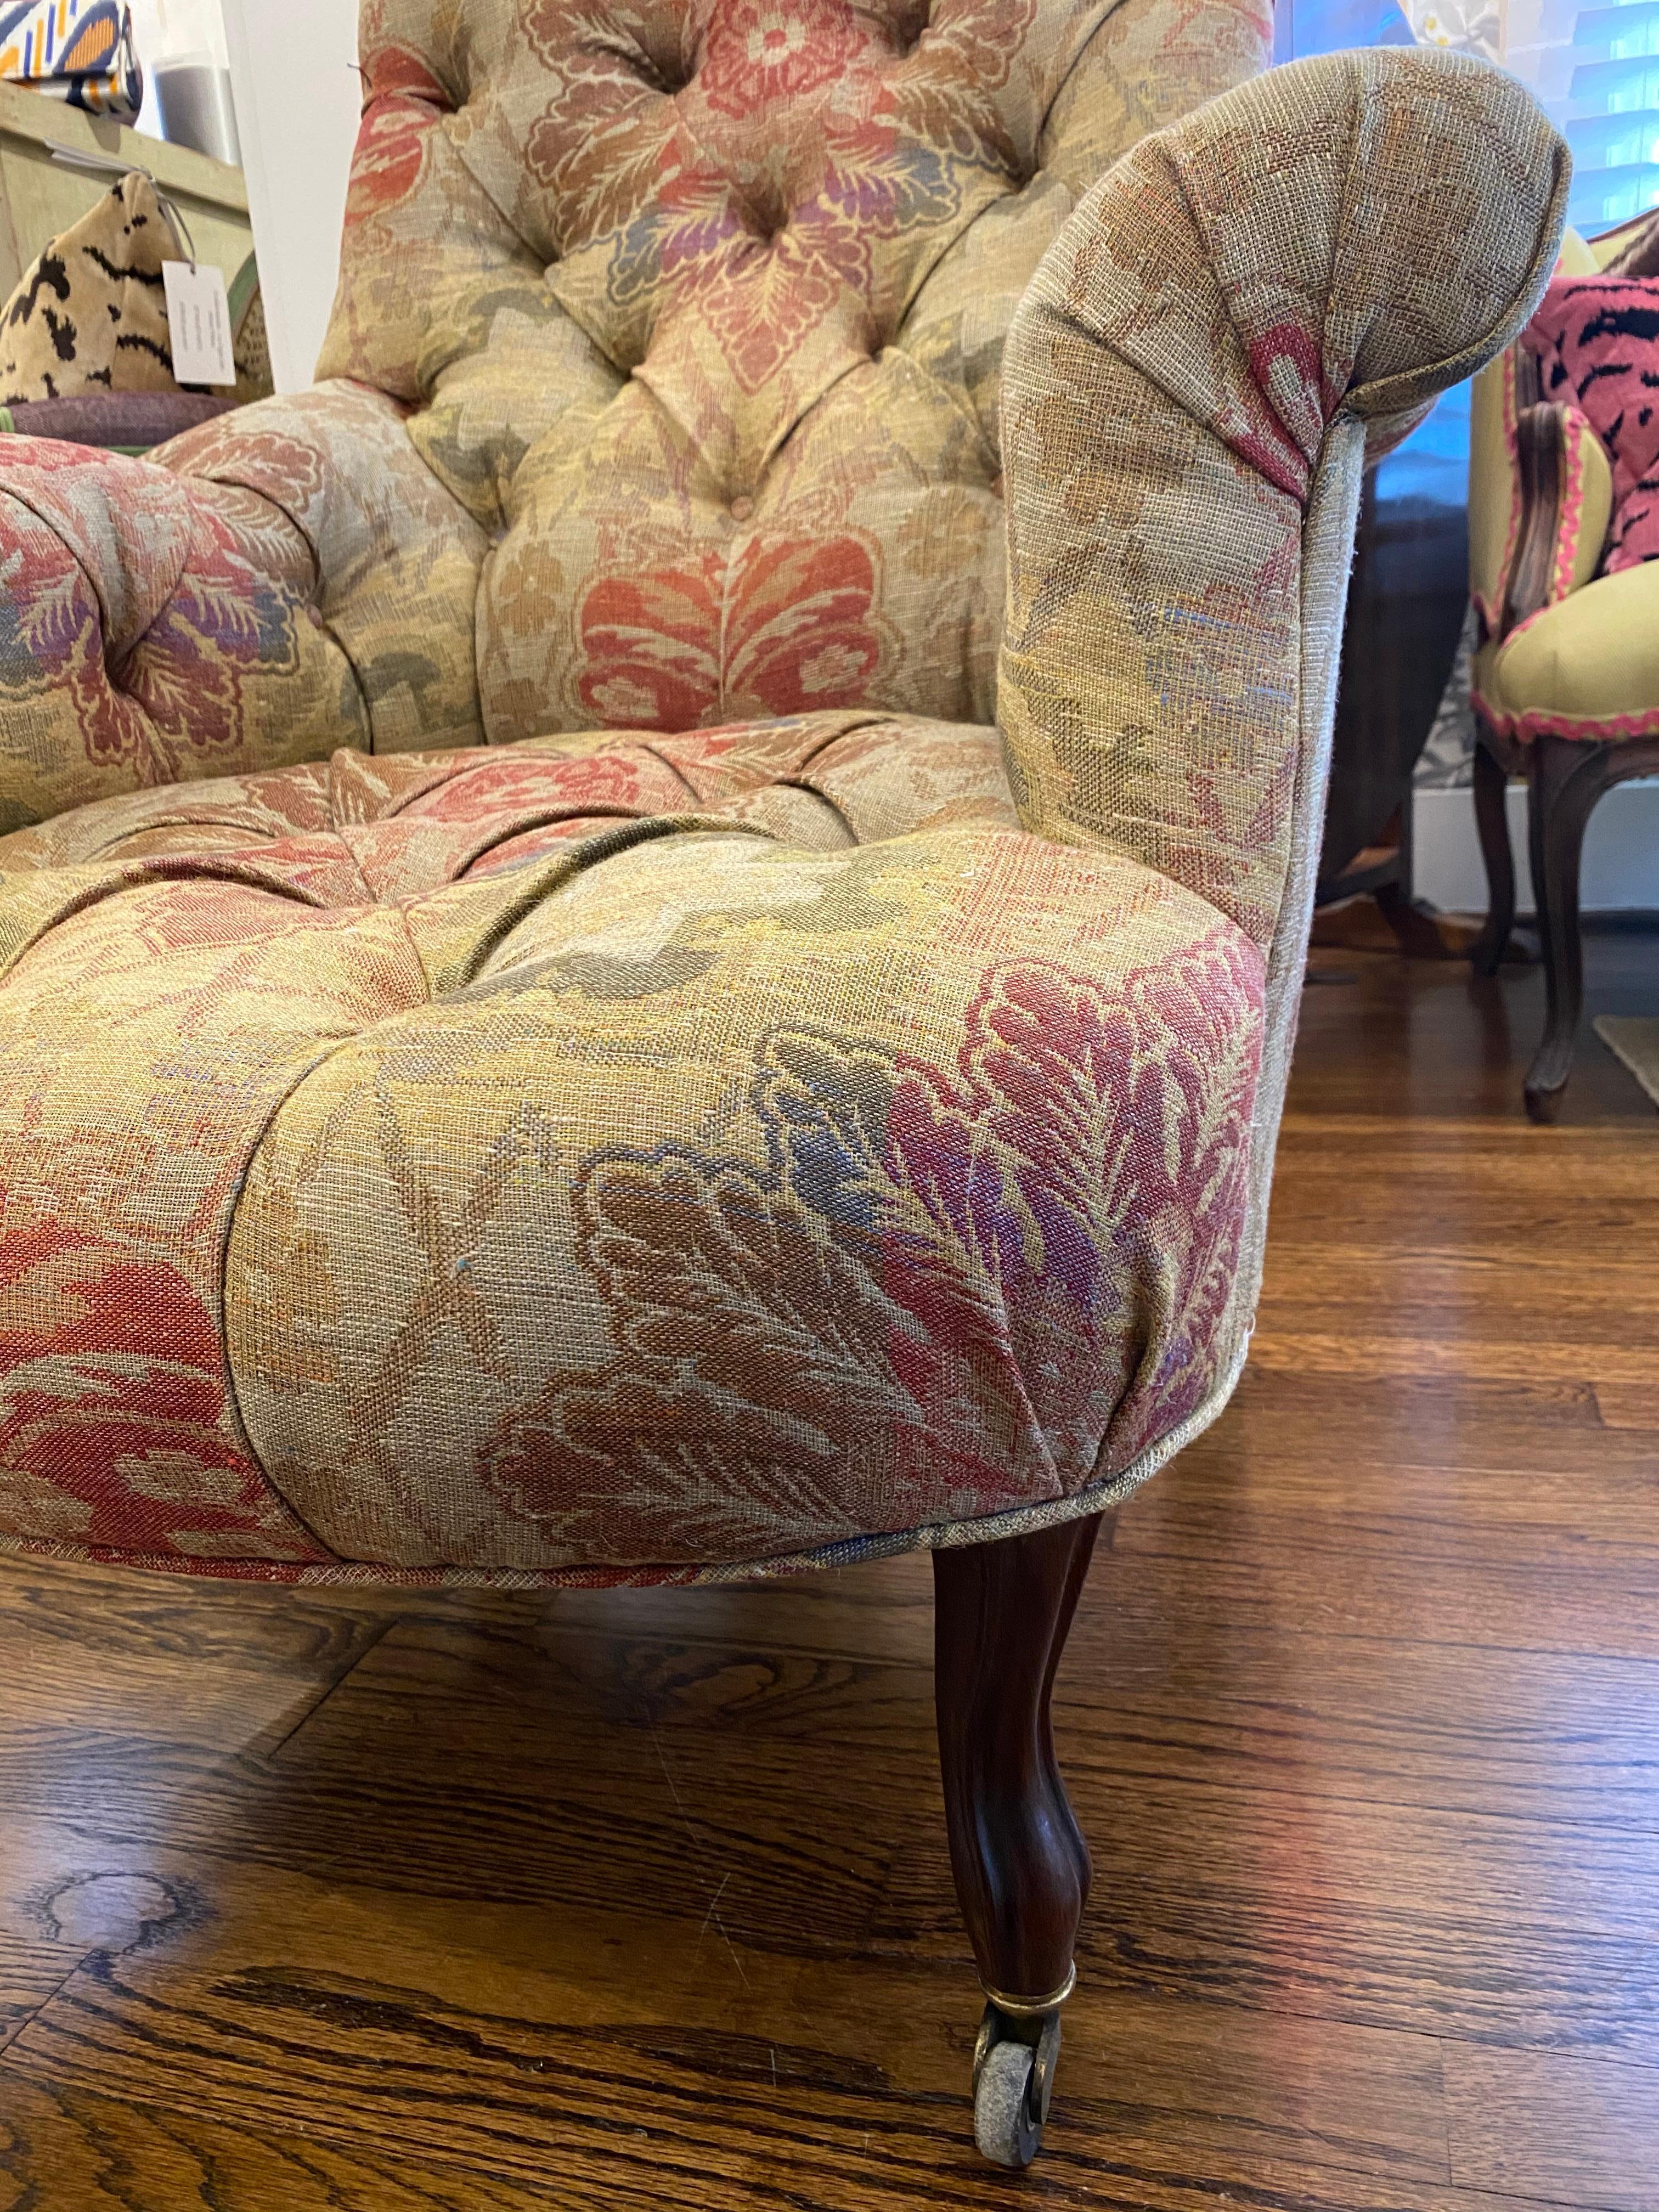 Classic 19th century French Belle Époque tufted armchair newly upholstered in a Rogers and Goffigon tapestry fabric.